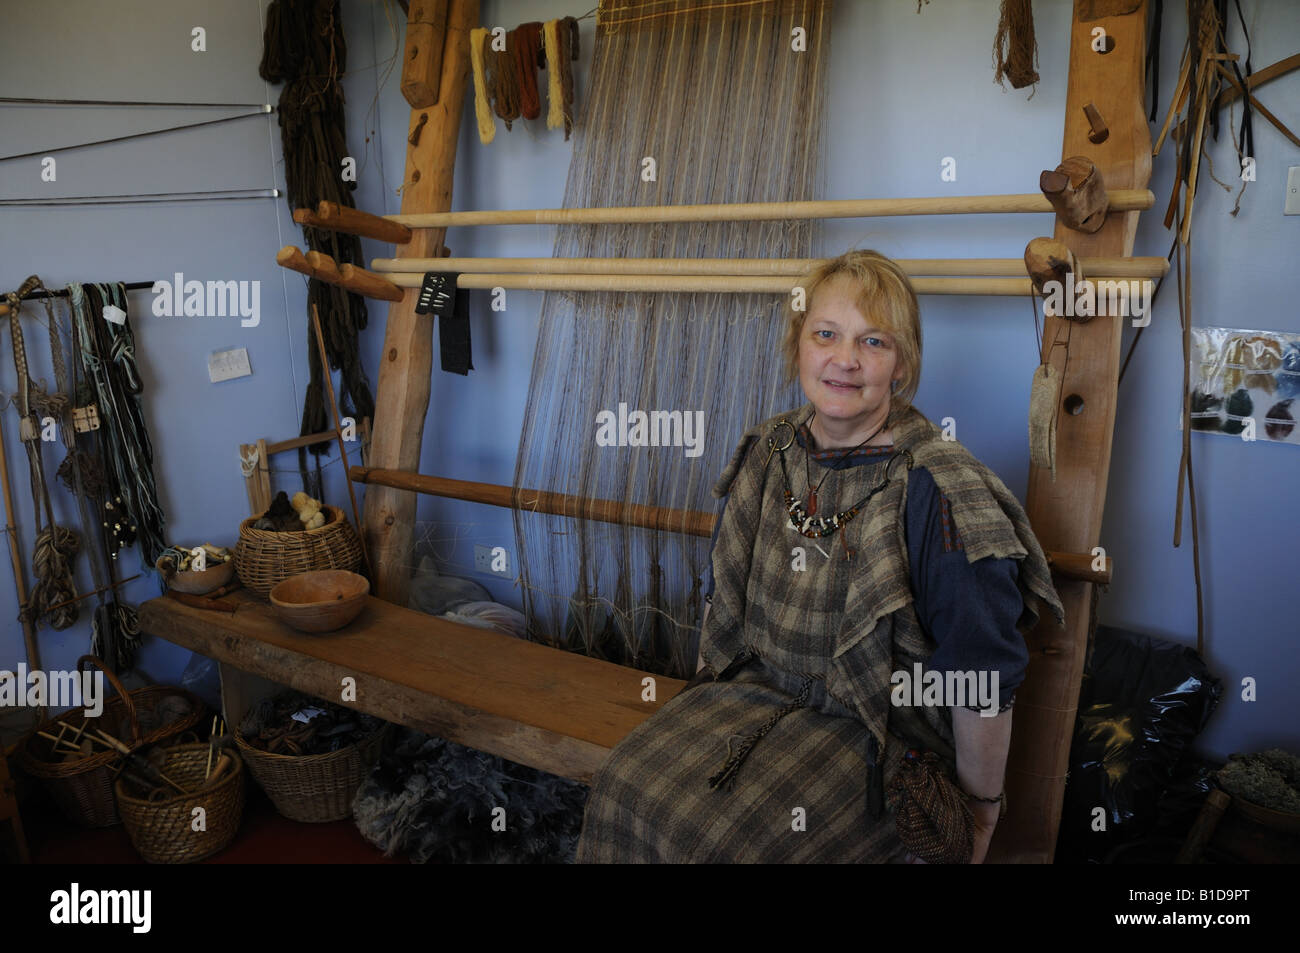 At Scatness in the Shetland Isles, Shetlander Elizabeth Johnston weaves on a loom similar to ones the Vikings would have used. Stock Photo